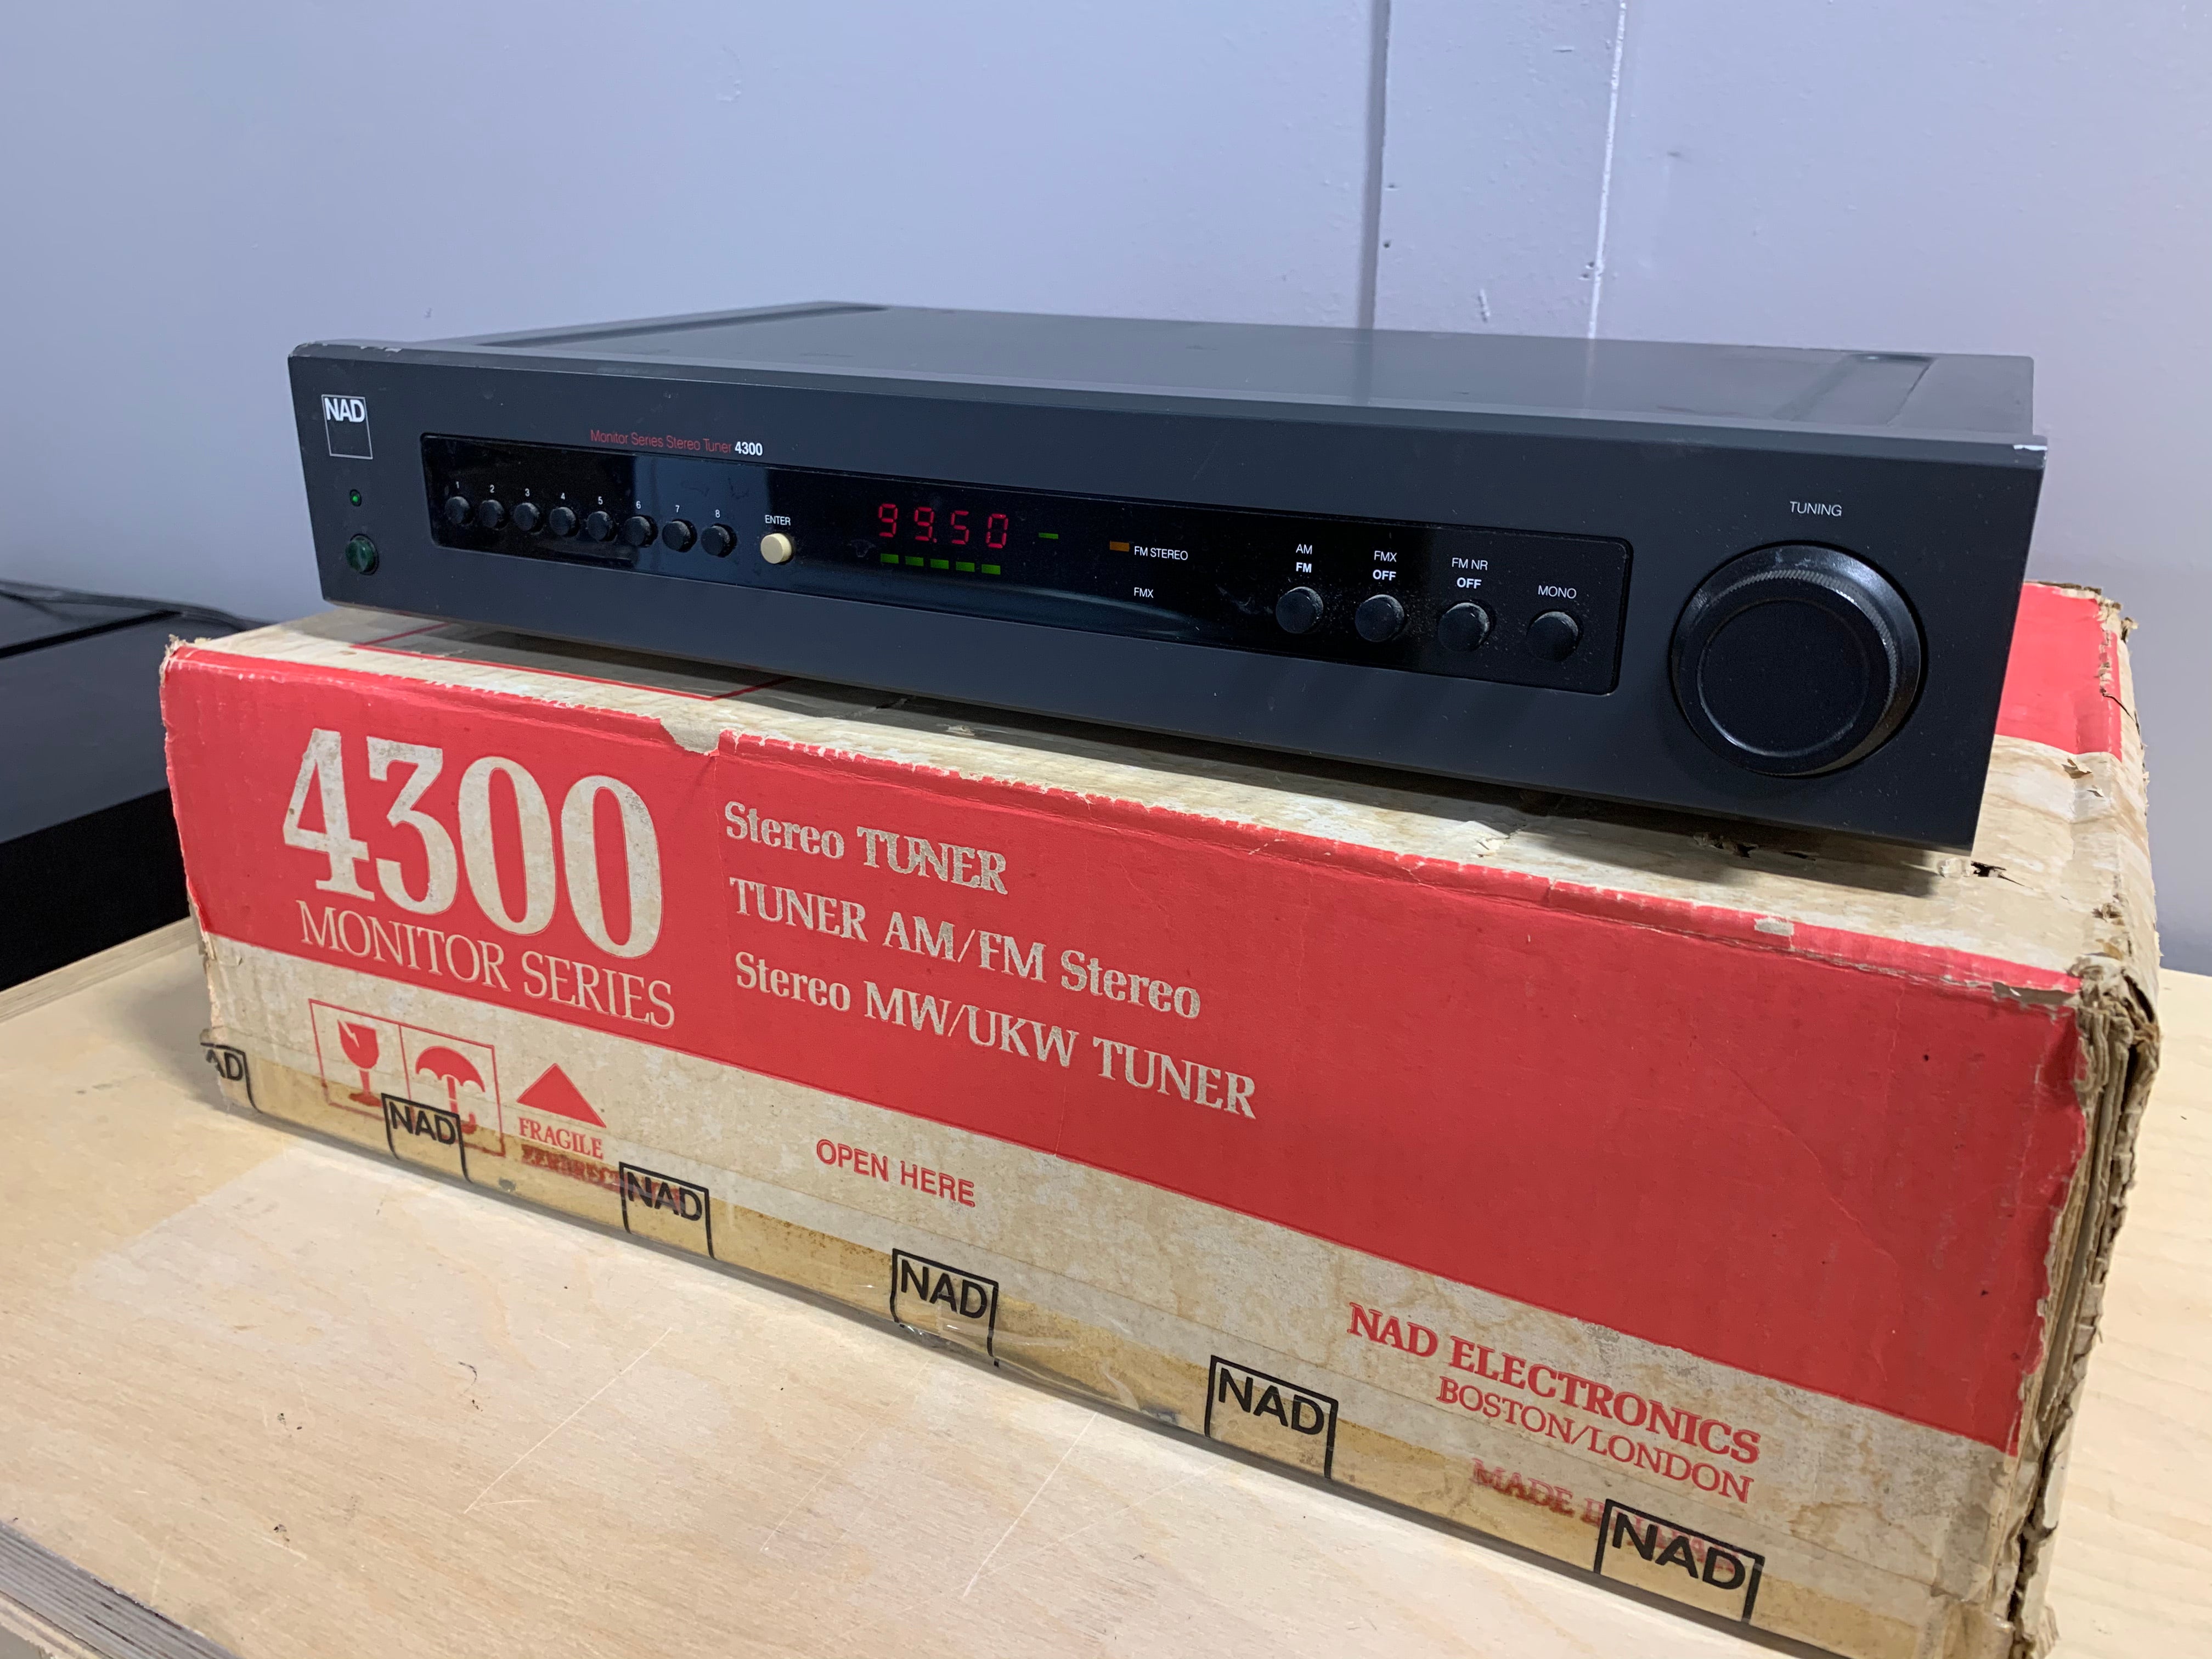 NAD Monitor Series 4300 Stereo Tuner - SOLD